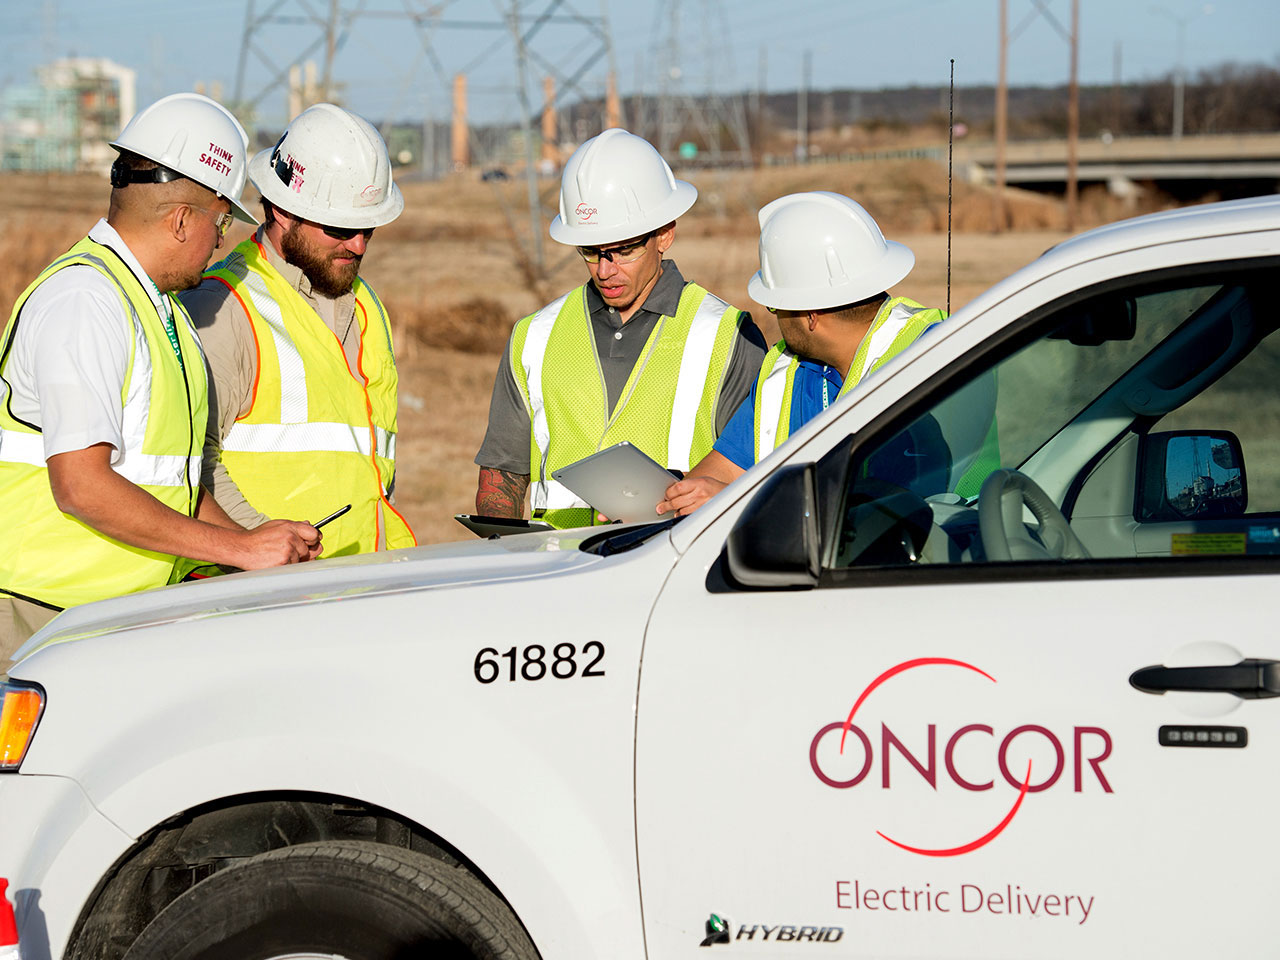 As Texas continues to prosper, Oncor meets the state�s growing energy demands through new transmission line projects.